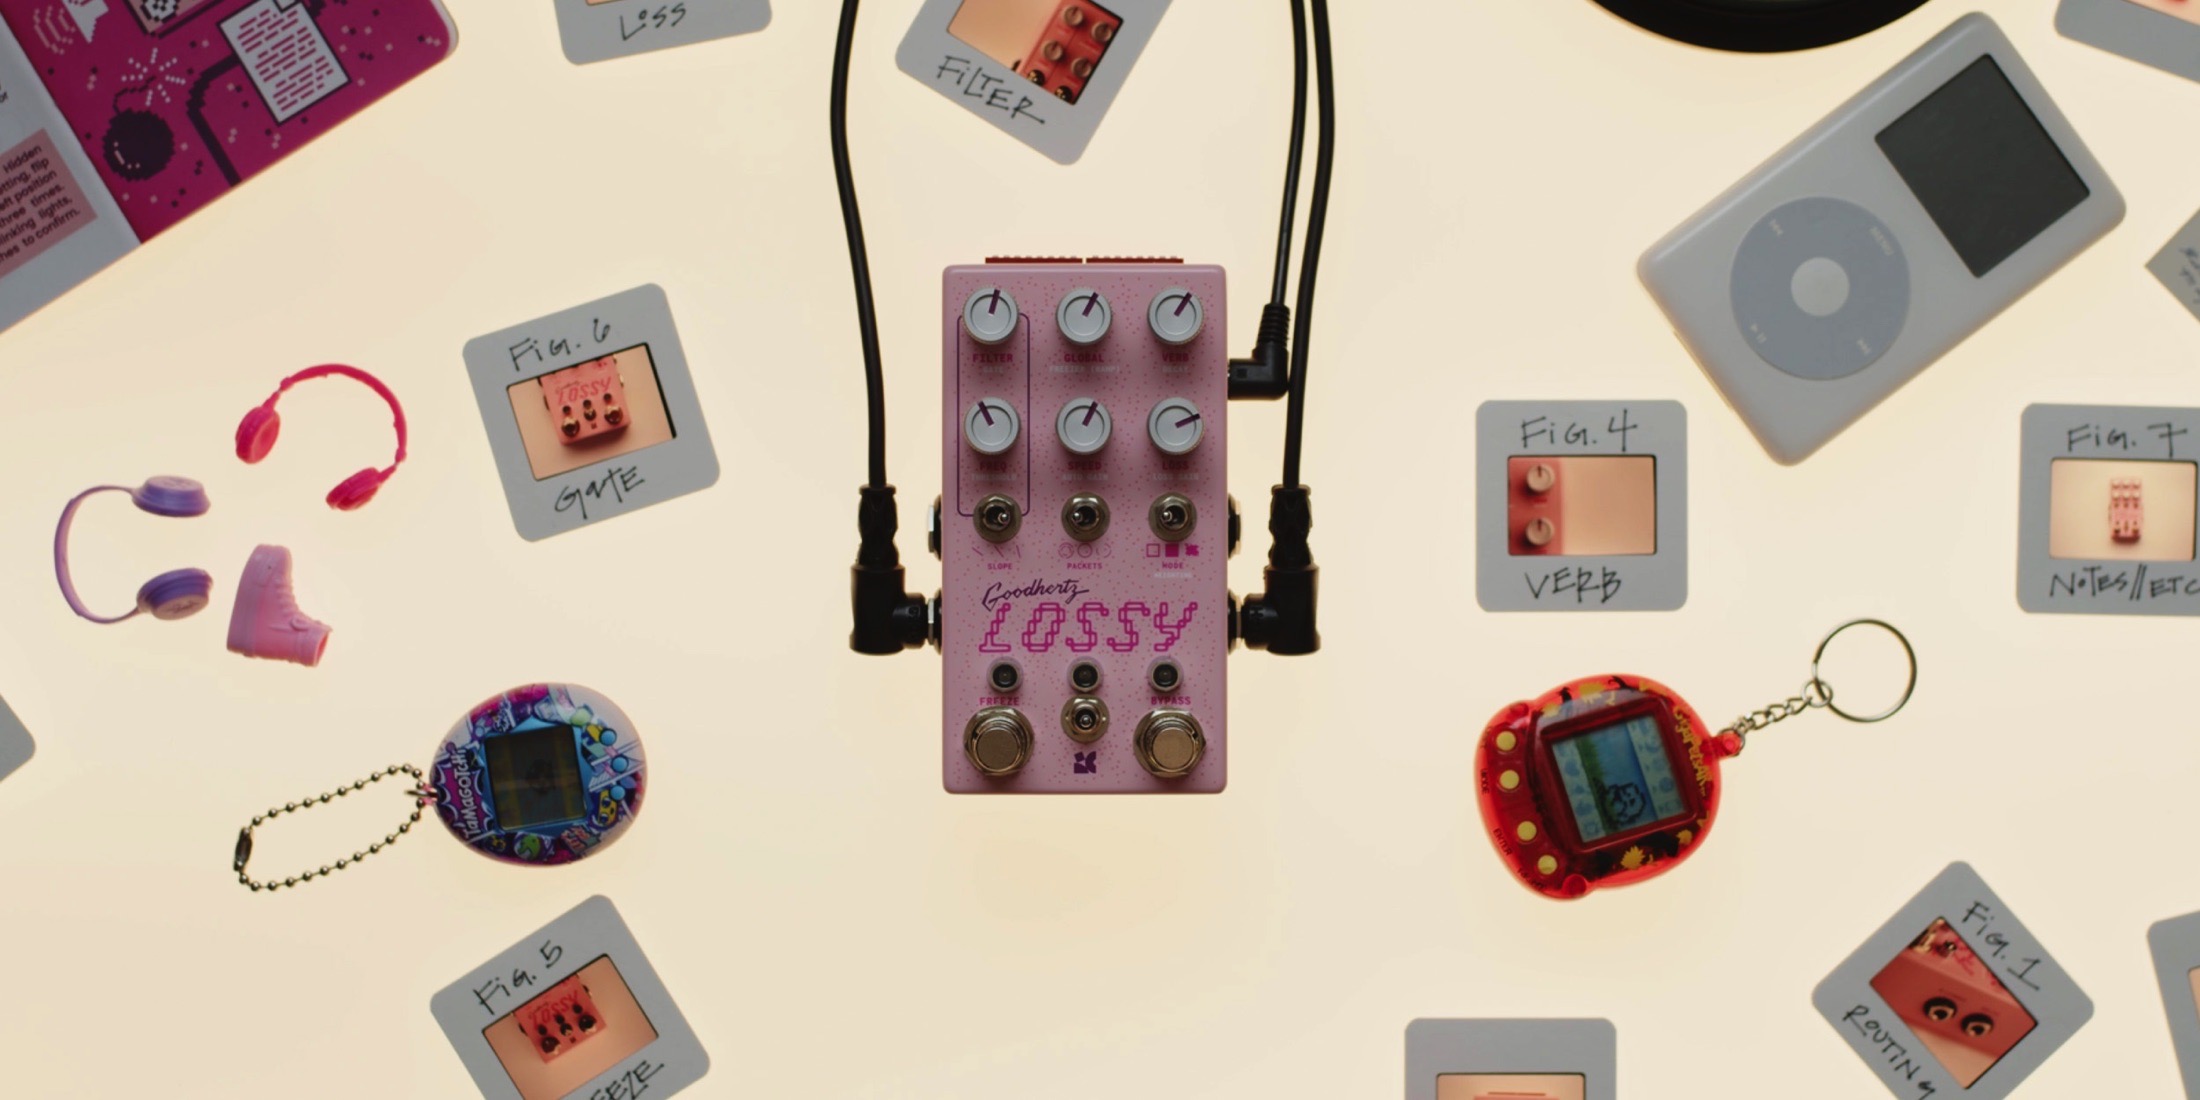 Chase Bliss and Goodhertz's Lossy is a pedal that makes your guitar sound like a crappy MP3